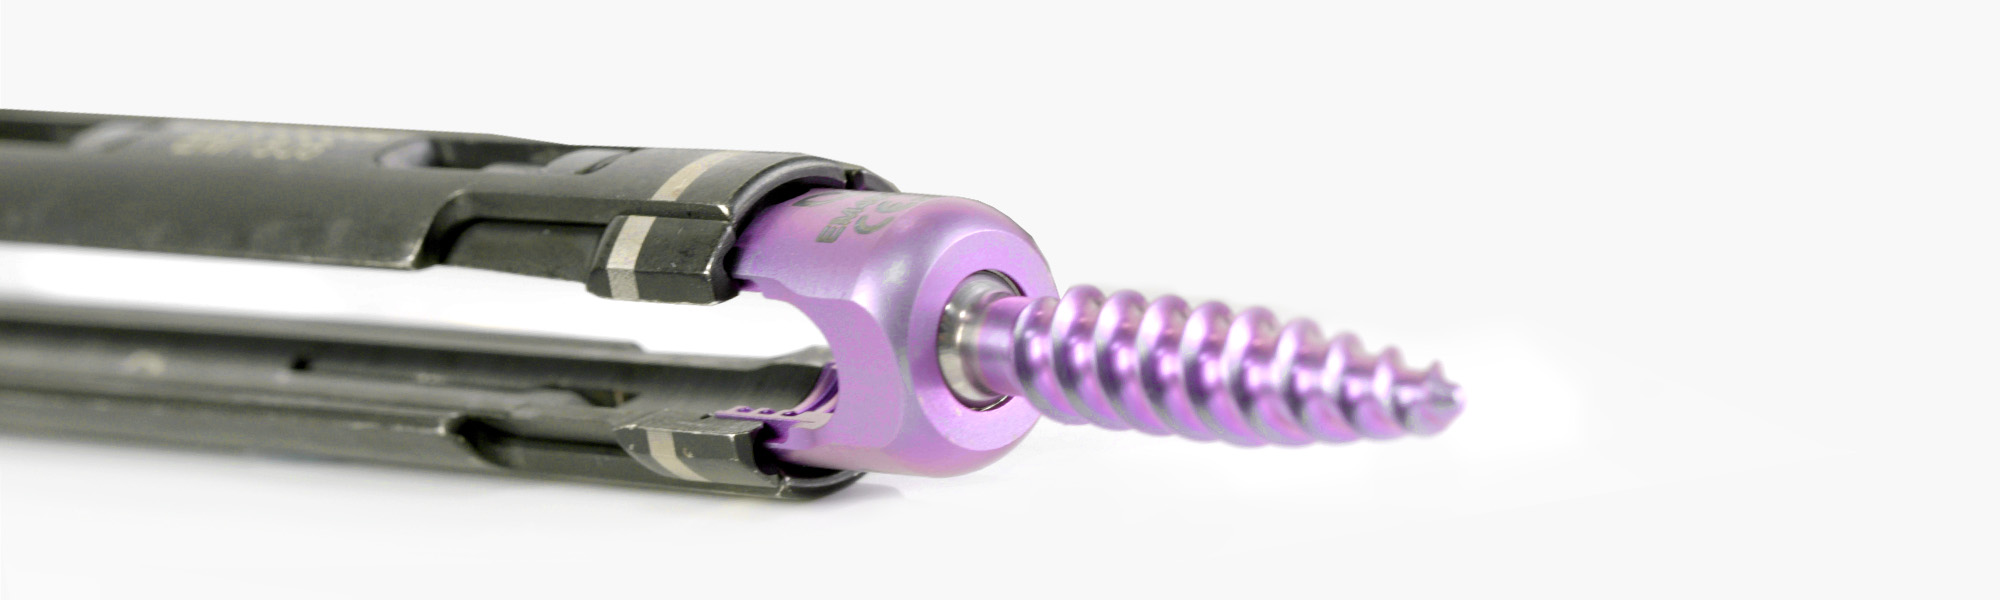 Image of a Reline 3d screw